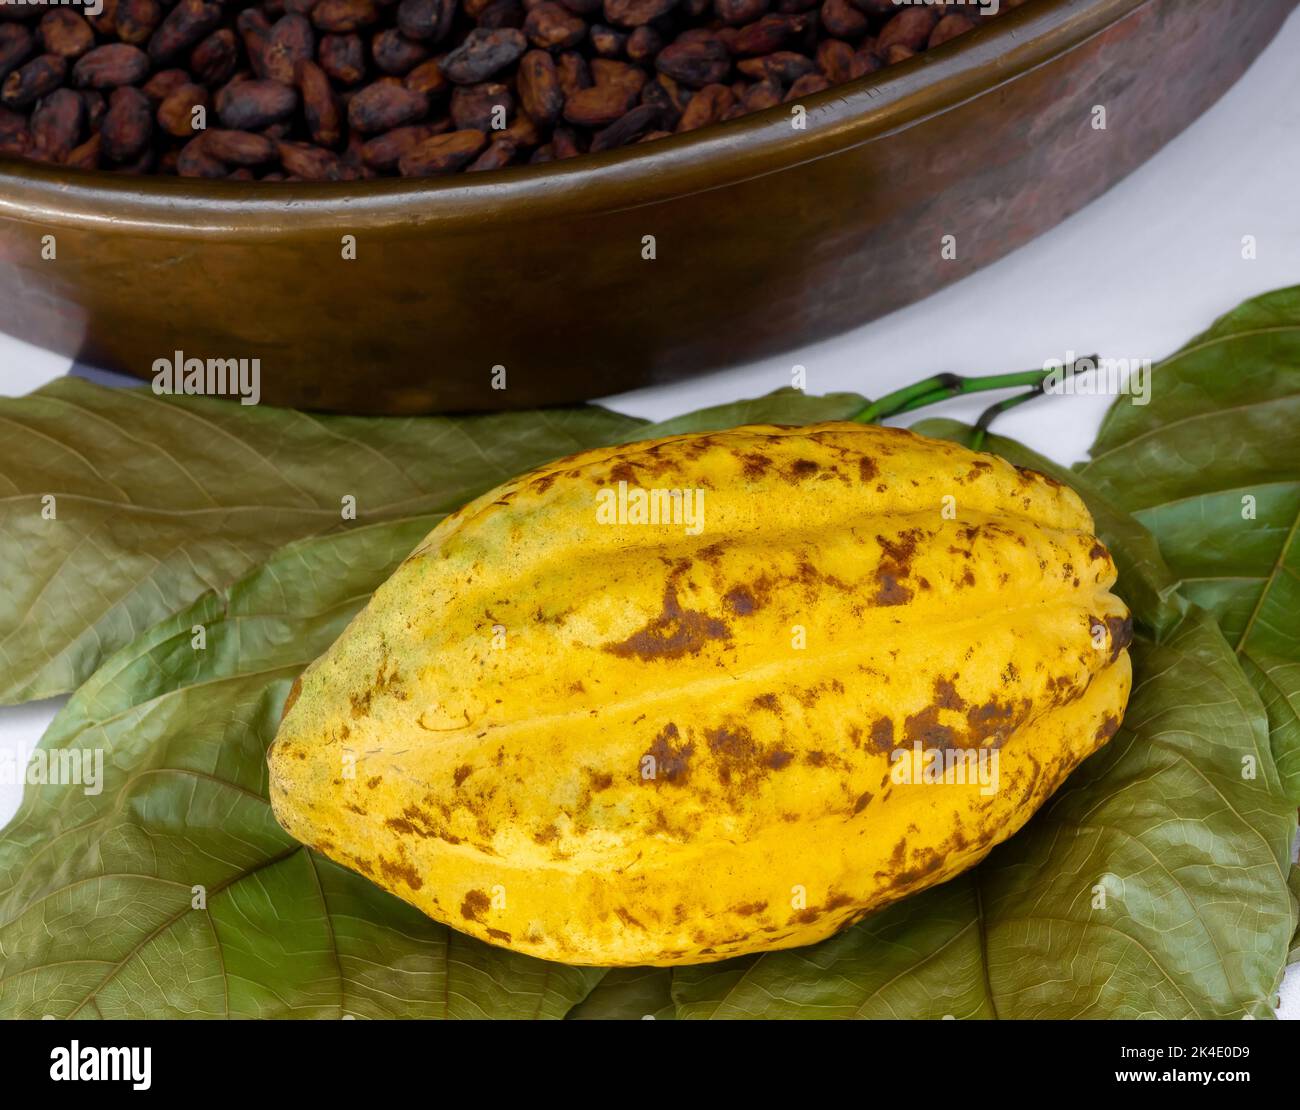 A Yellow cocoa fruit on green leaves near cacao seed heap preparing to make chocolate. Close-up cocoa pods and raw materials of aromatic natural cocoa Stock Photo